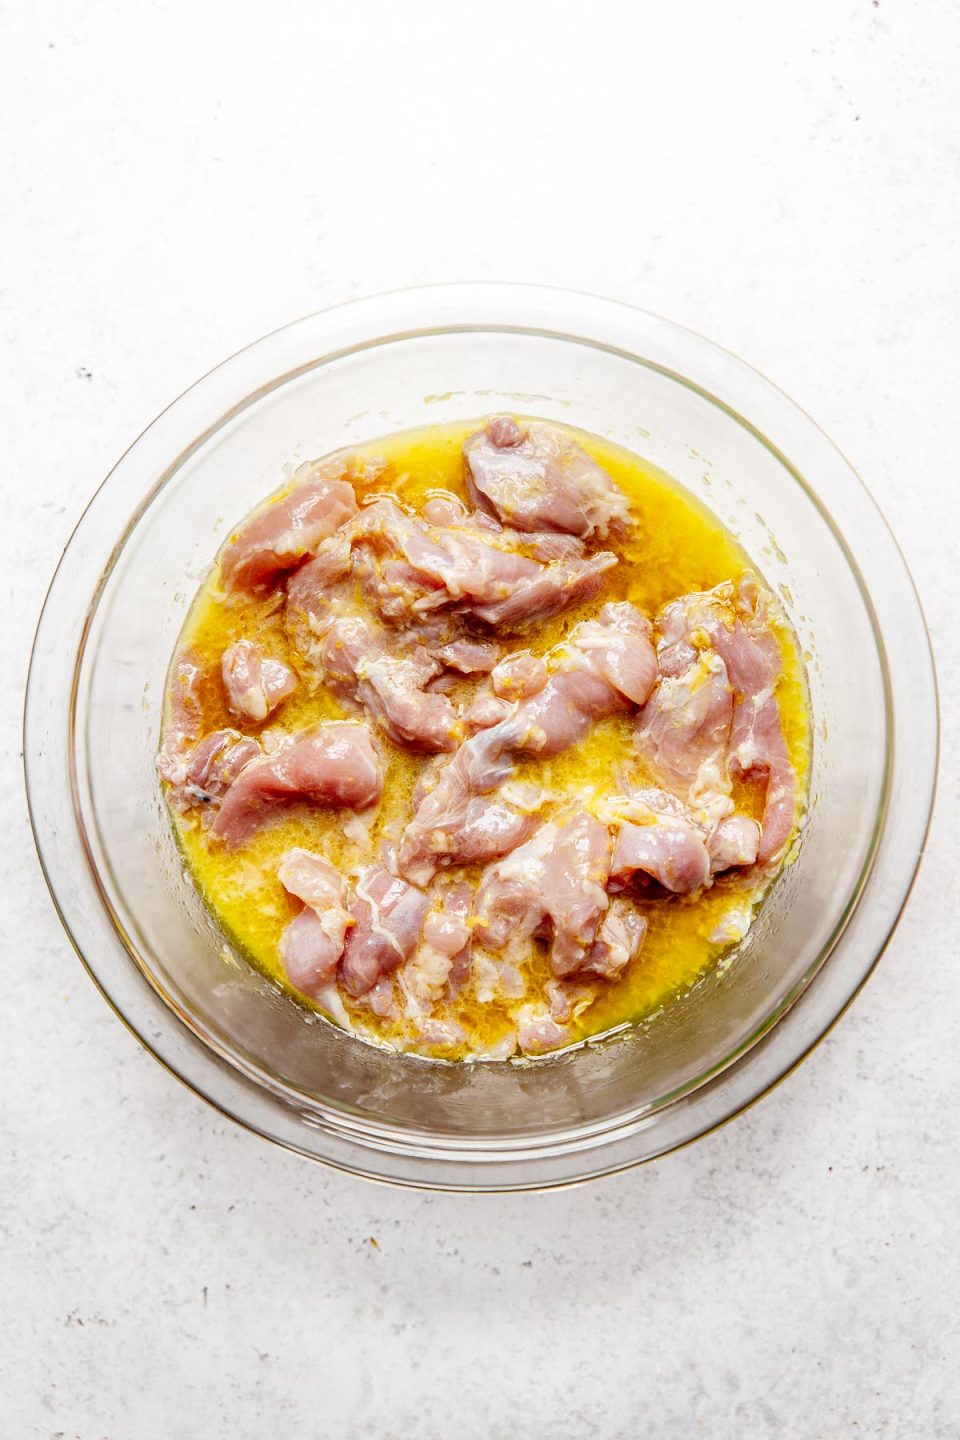 Chicken thighs marinating in a lemon-garlic marinade in a large bowl atop a white surface.